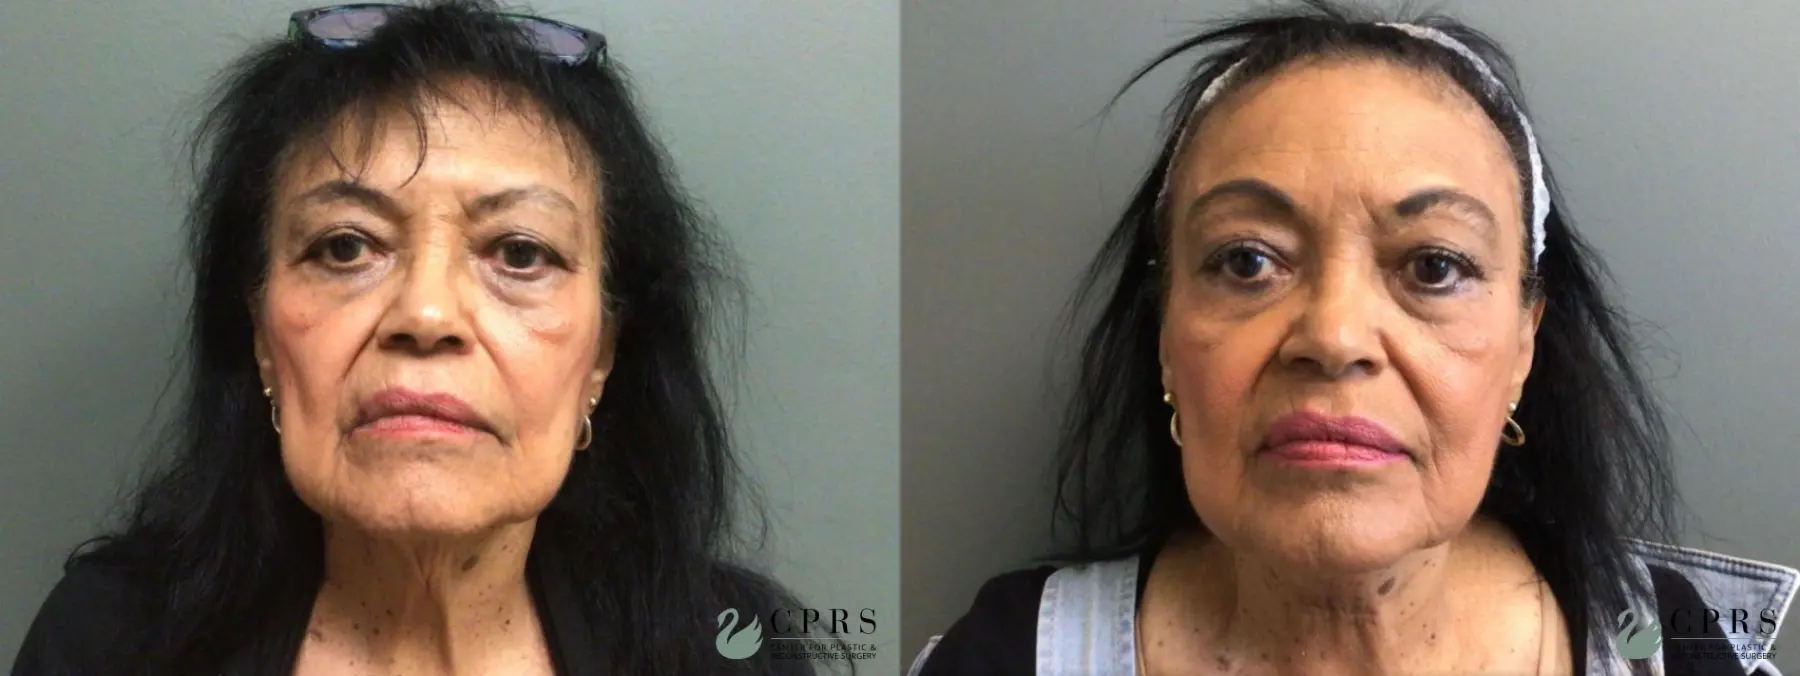 Neck Lift: Patient 3 - Before and After 1